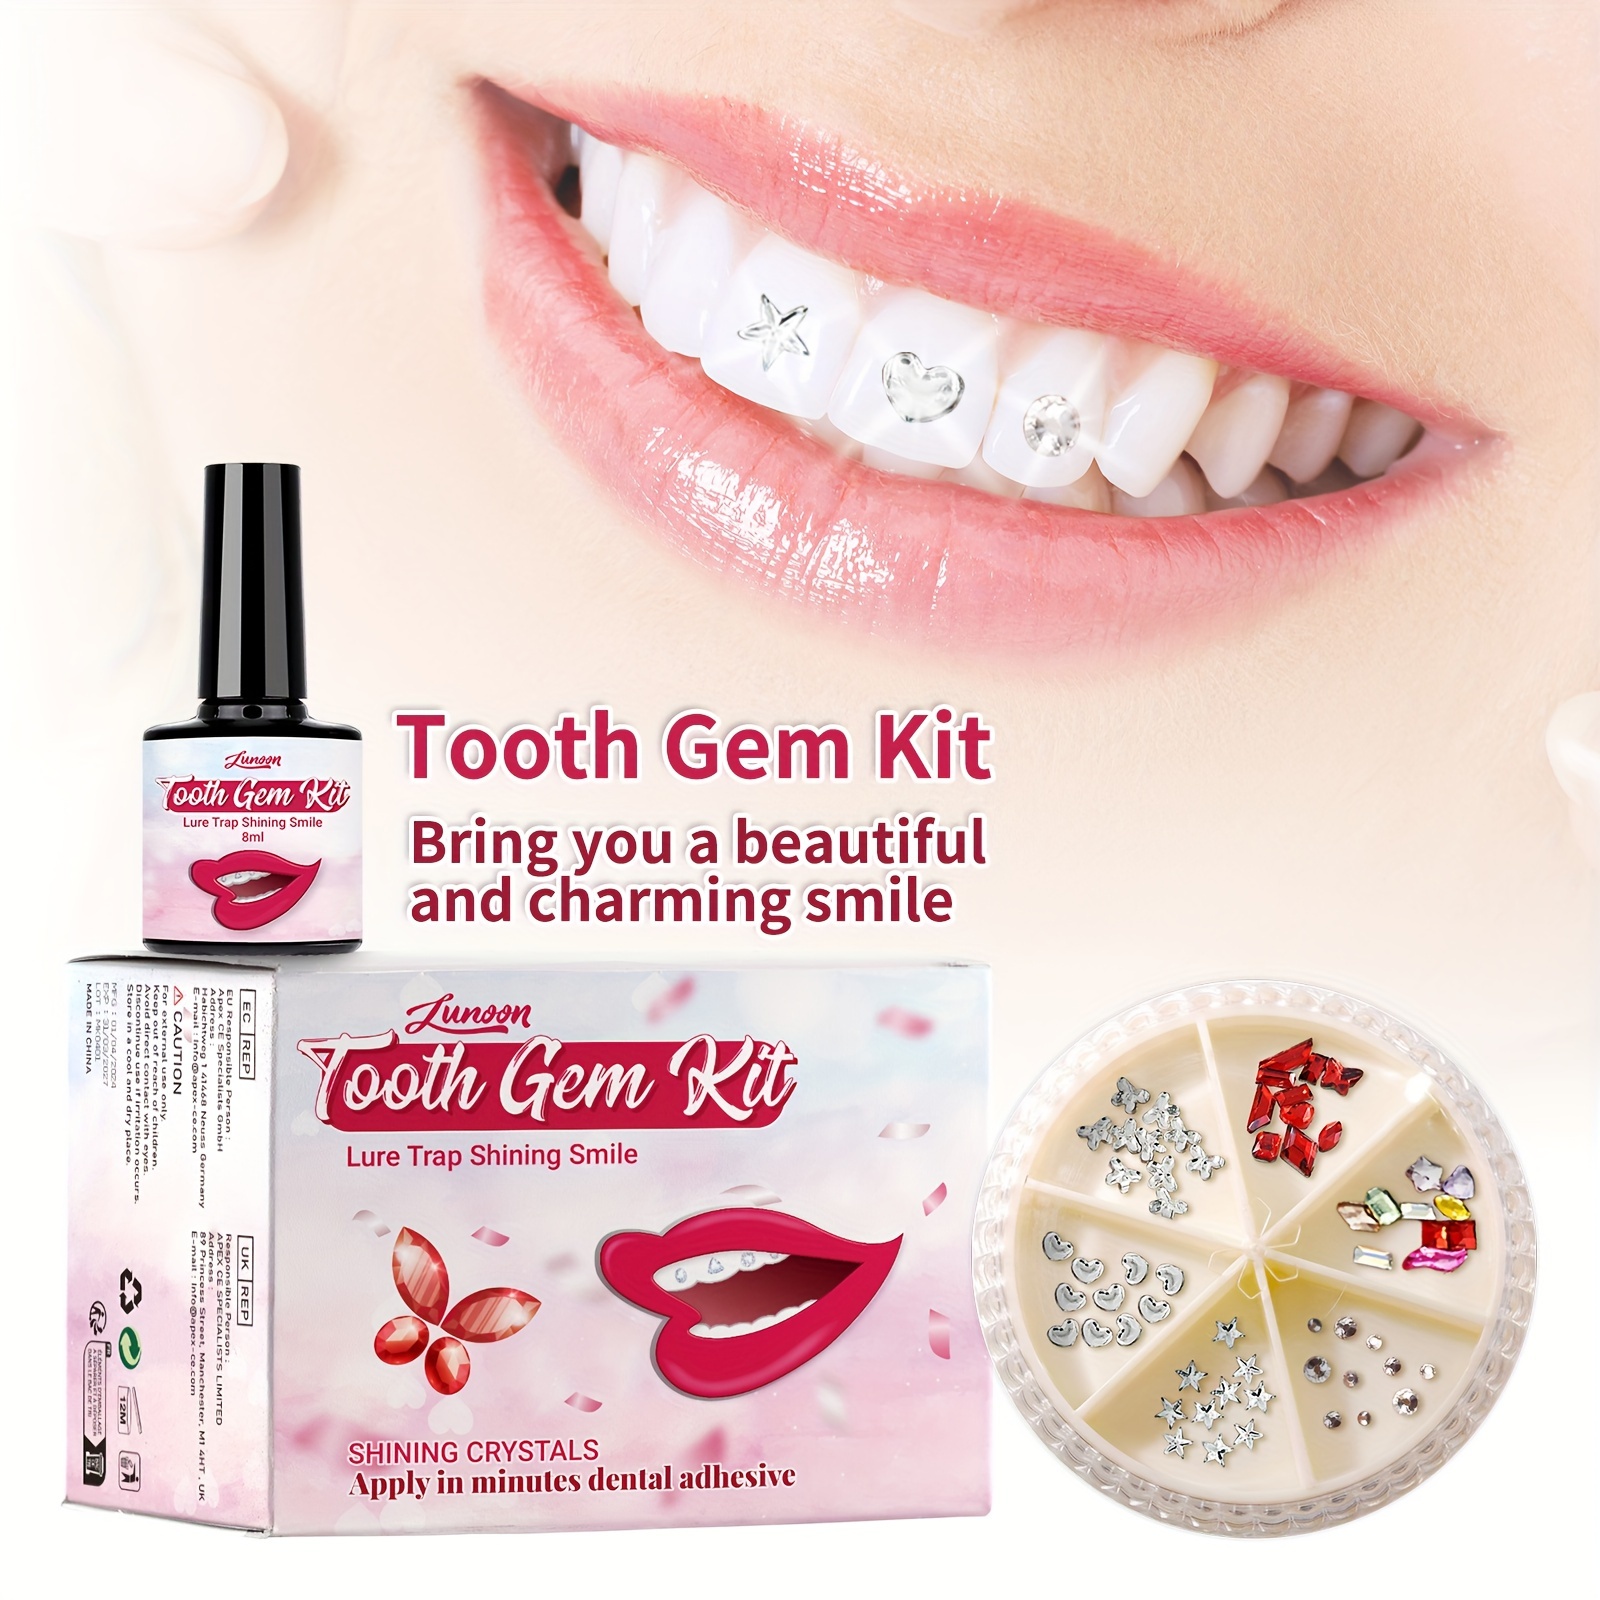 

Diy Tooth Gem Kit - Colorful Faux Crystal Teeth Jewelry Set With Glue & Curing Light, Easy Application For A Confident Smile